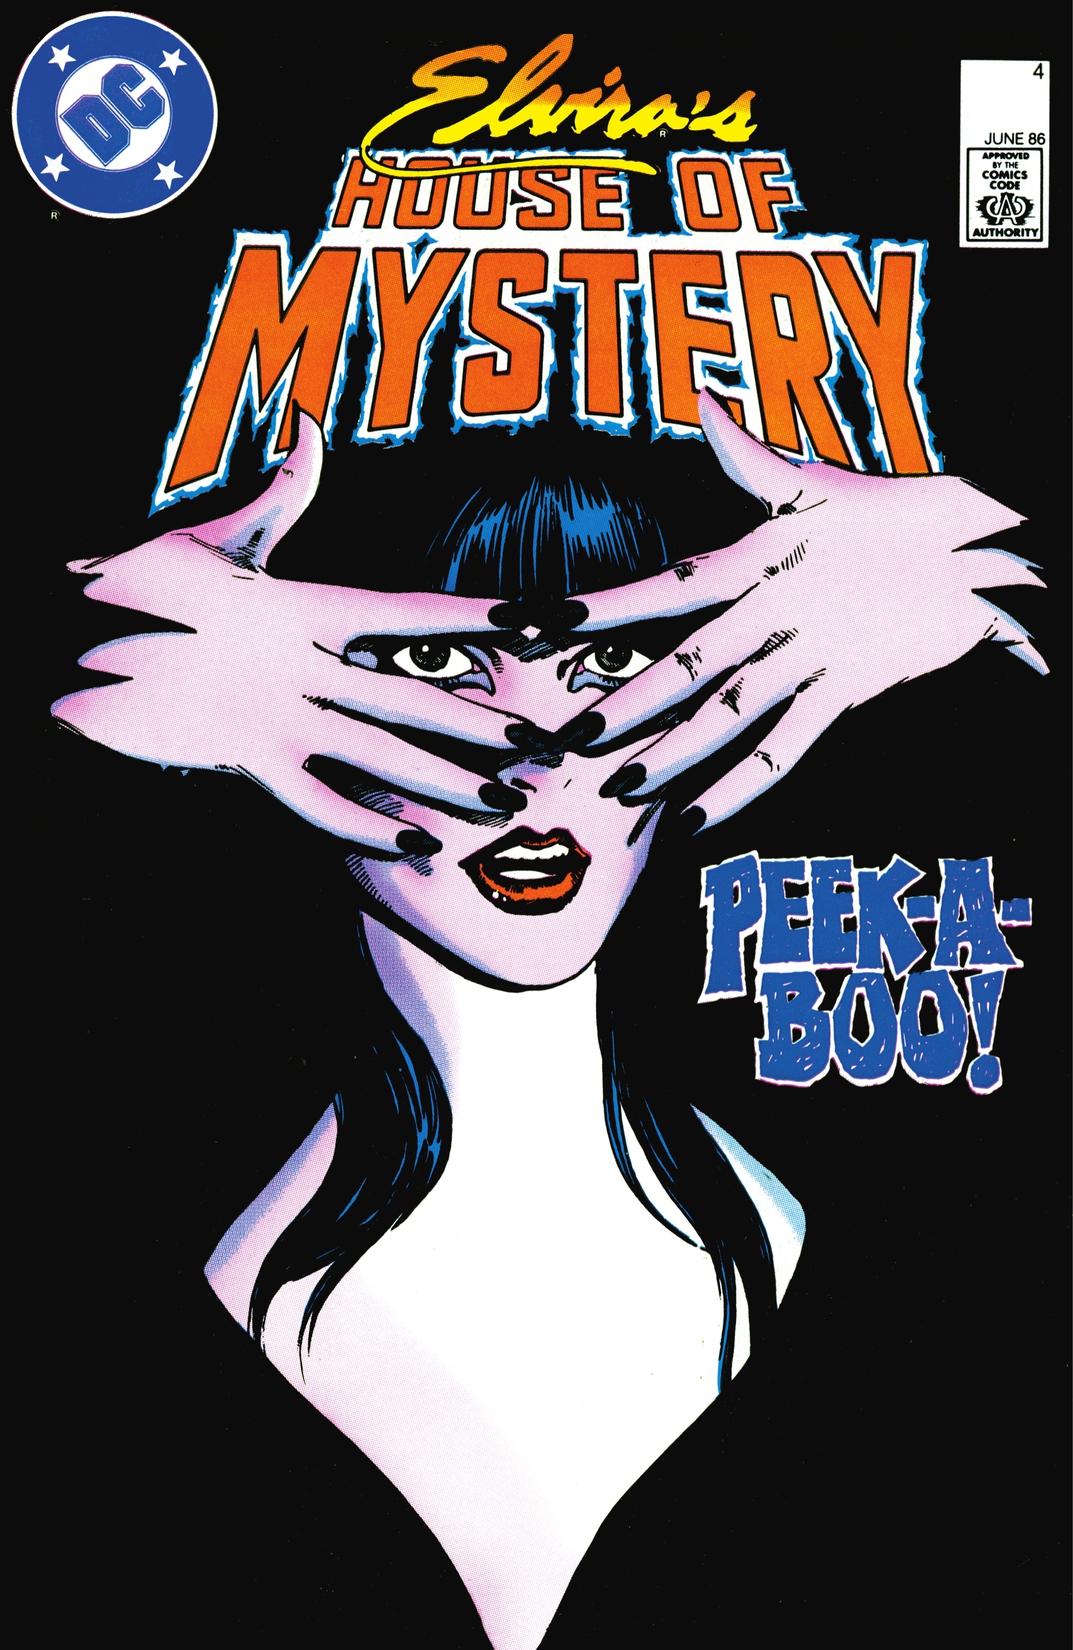 Elvira's House of Mystery #4 preview images